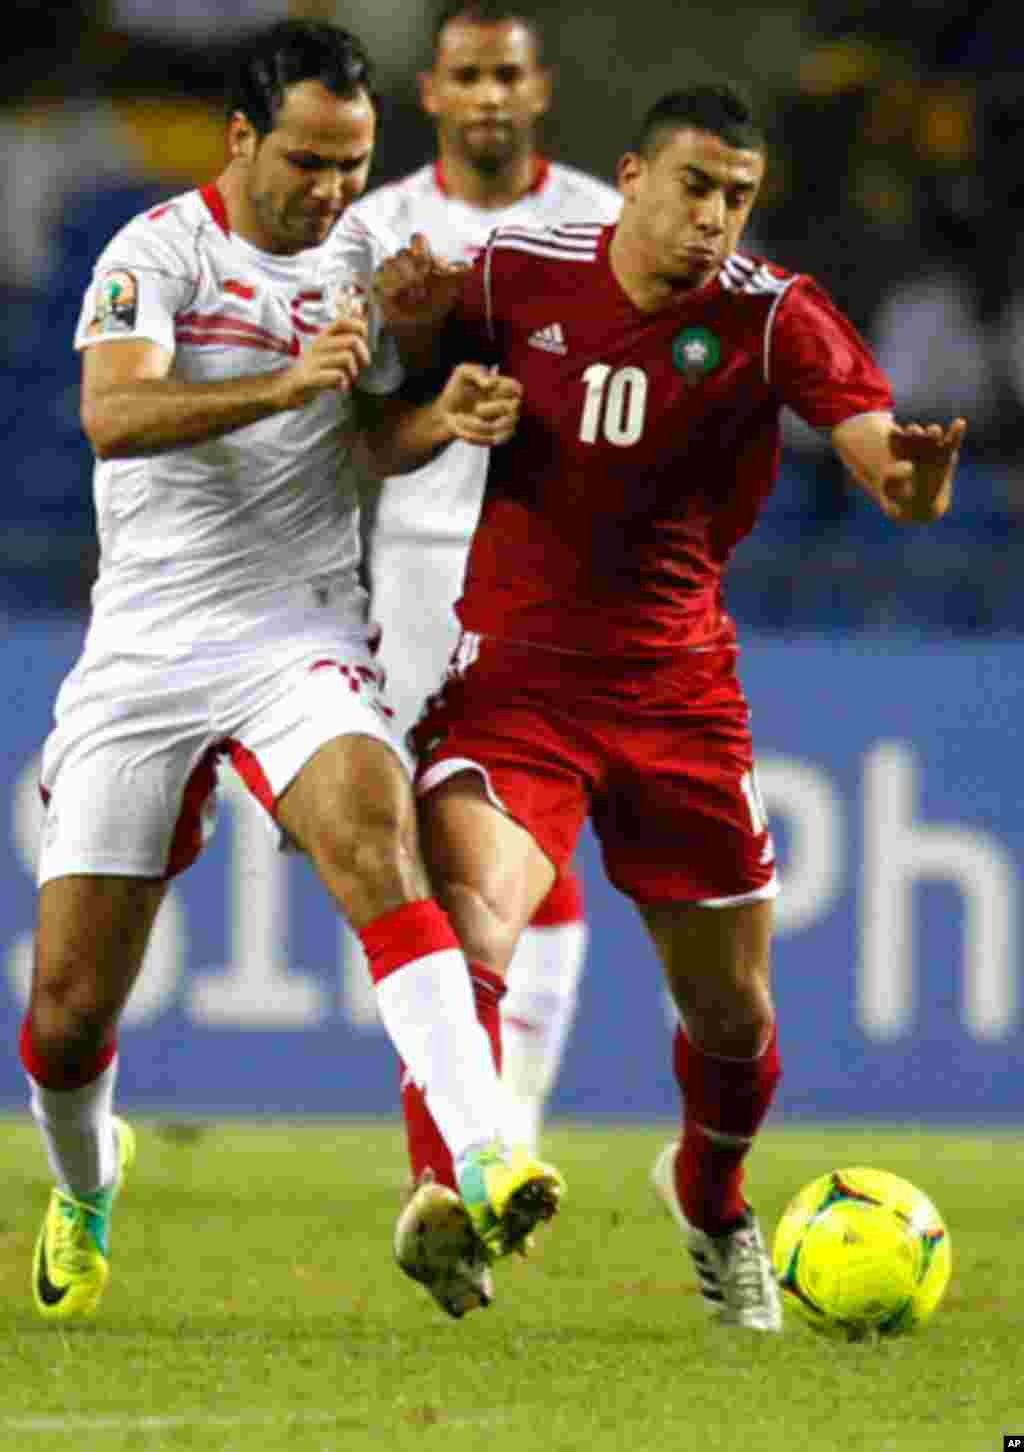 Morocco's Younes drives the ball past Tunisia's Zauhaier during their African Cup of Nations Group C soccer match at Libreville